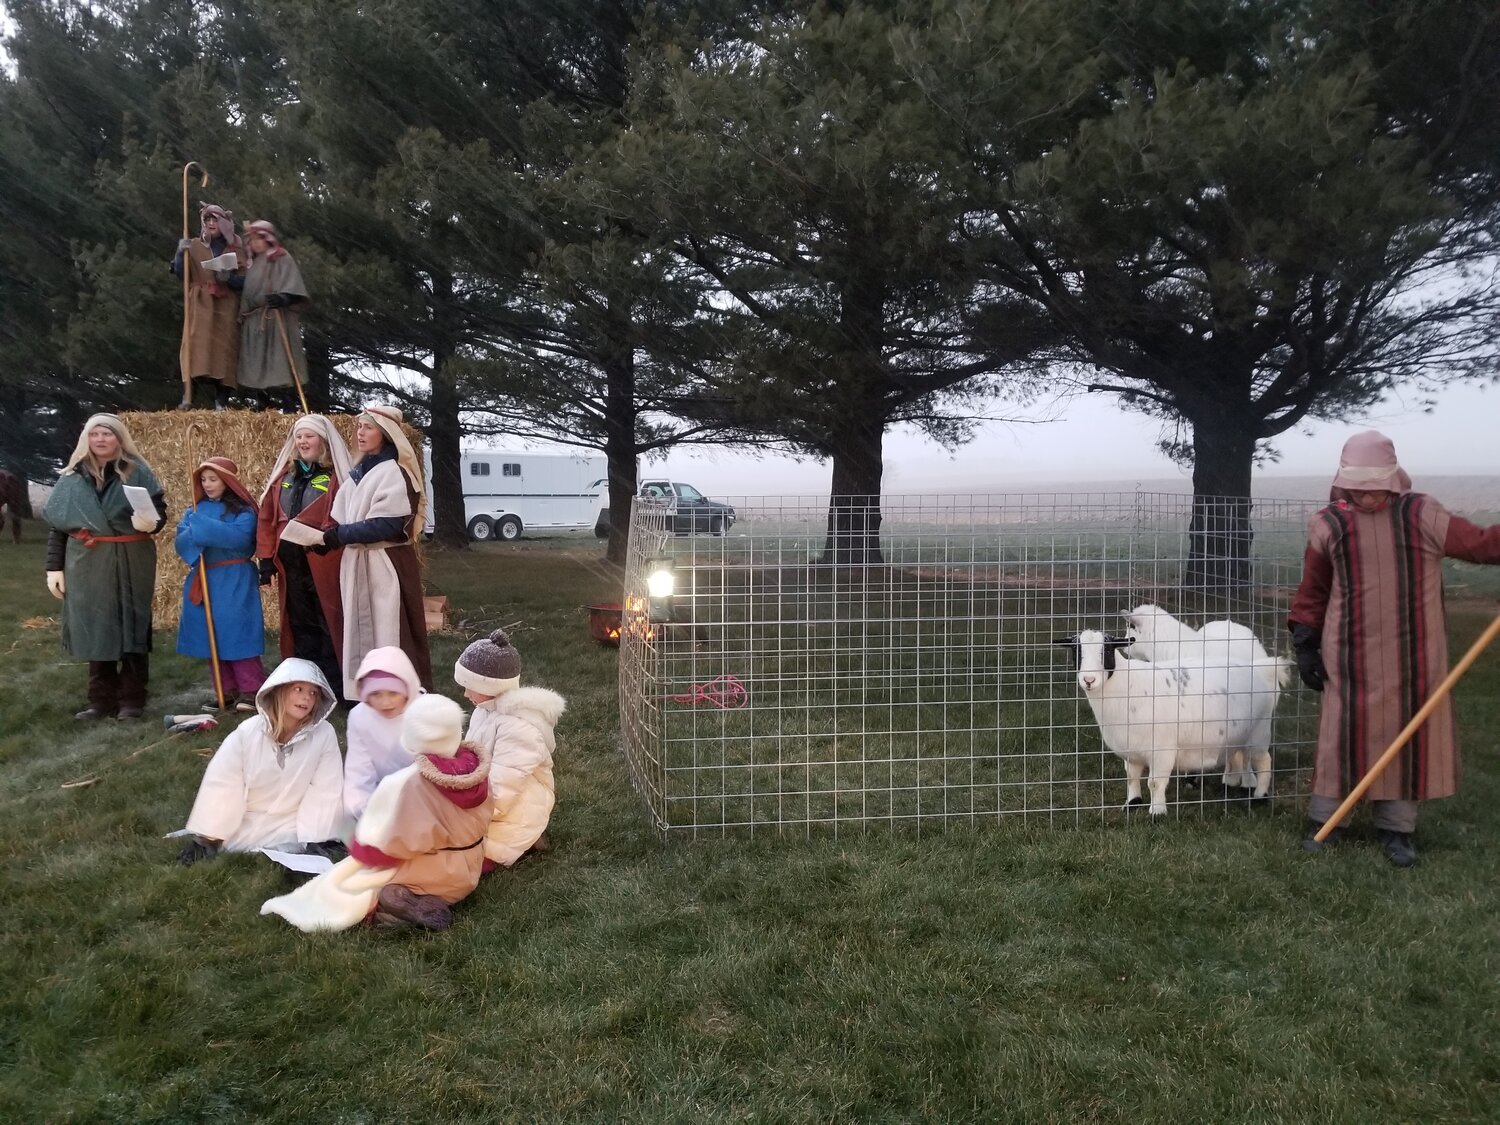 Children and adults dressed in costumes depicting scenes of the Nativity of Christ.  This group of shepherds tend to a pair of goats as snow began to fall on November 25th.